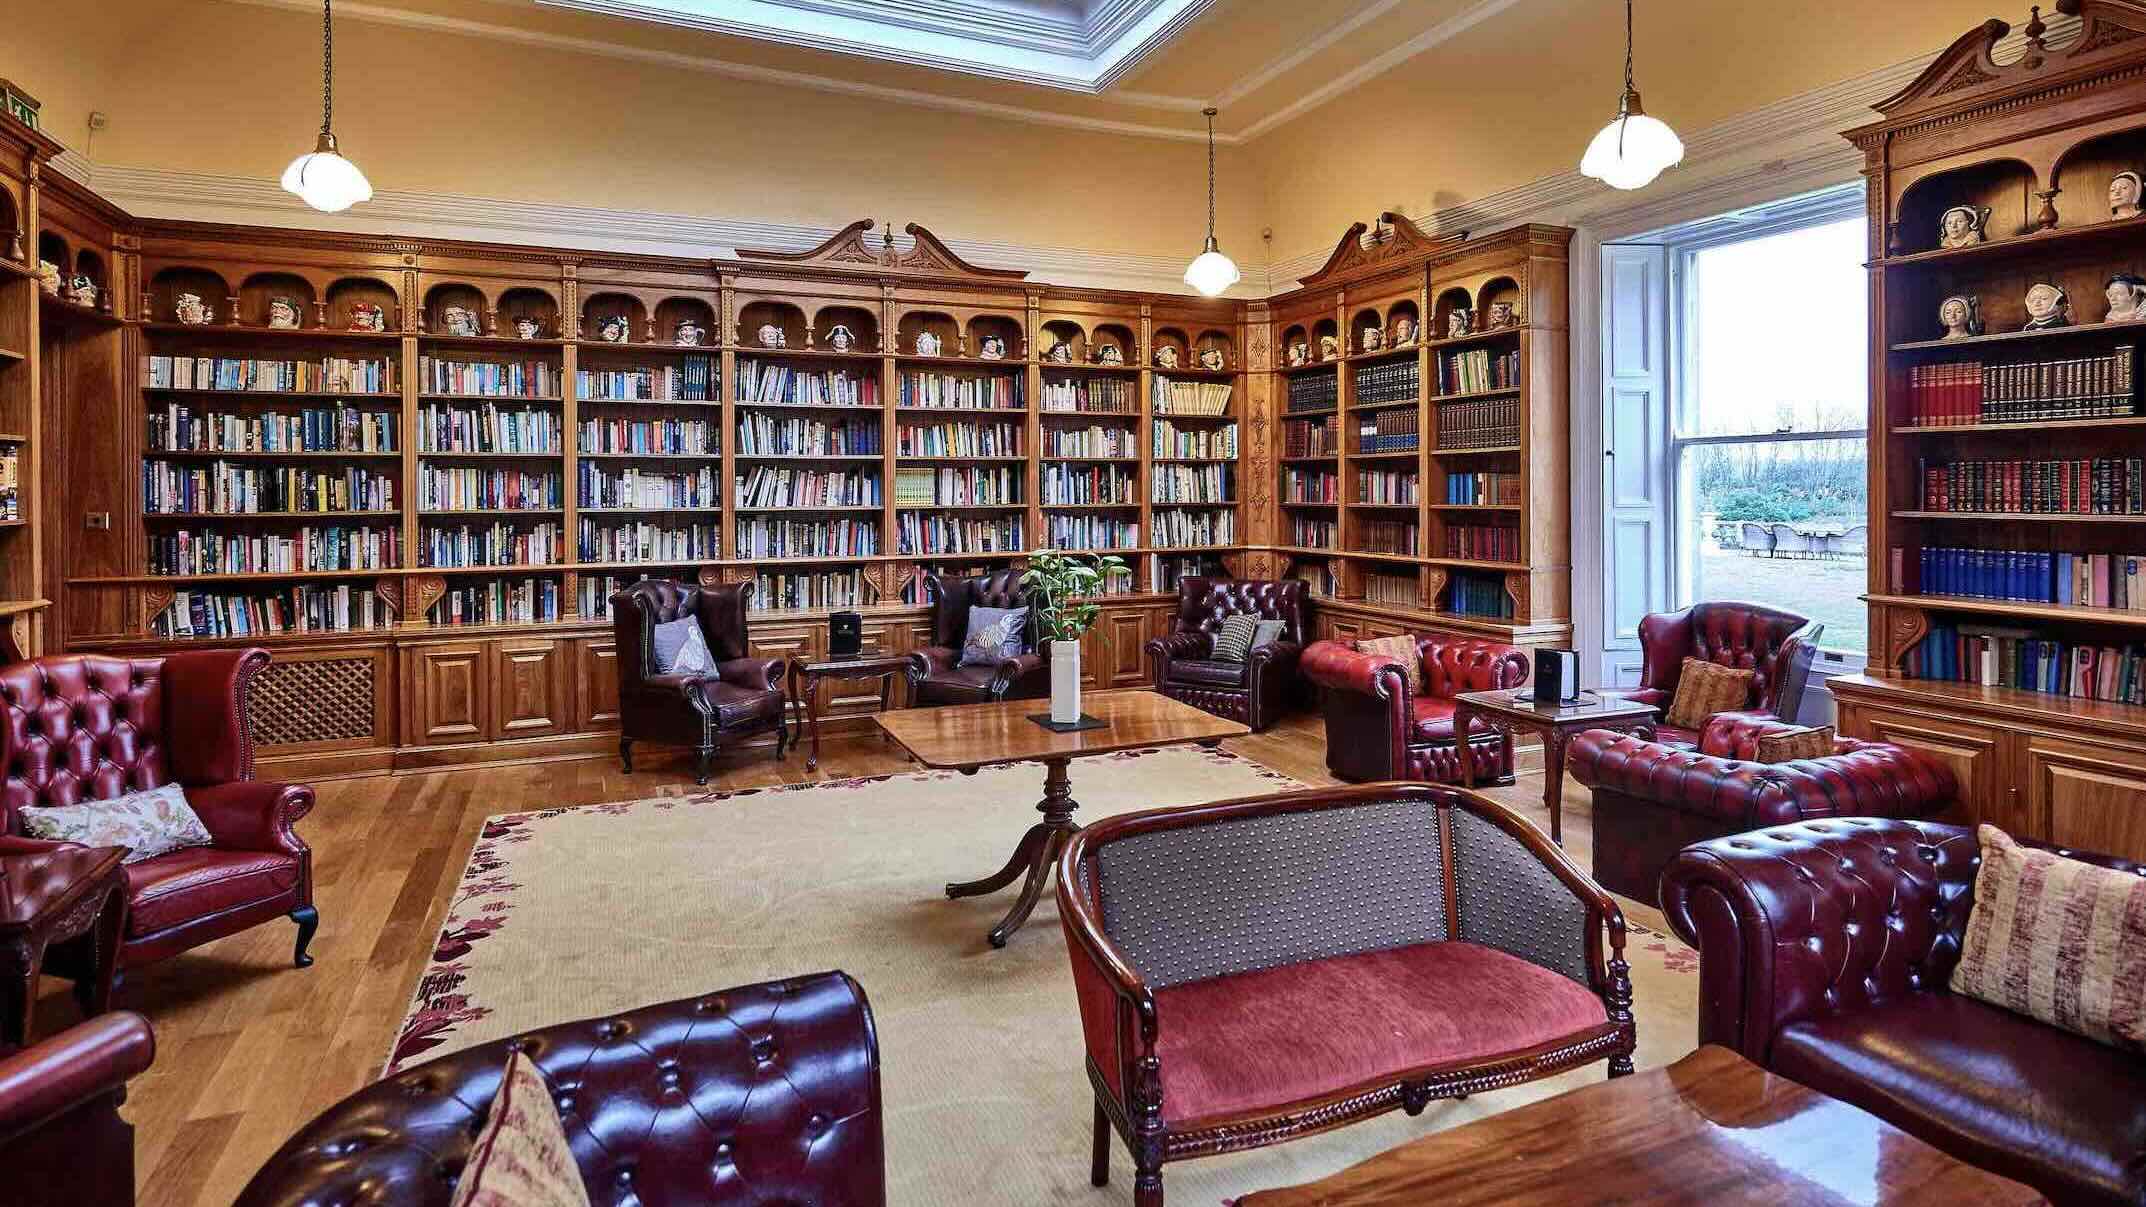 Doxford Hall's amenities include a fine dining restaurant, spa, and its sumptuous library